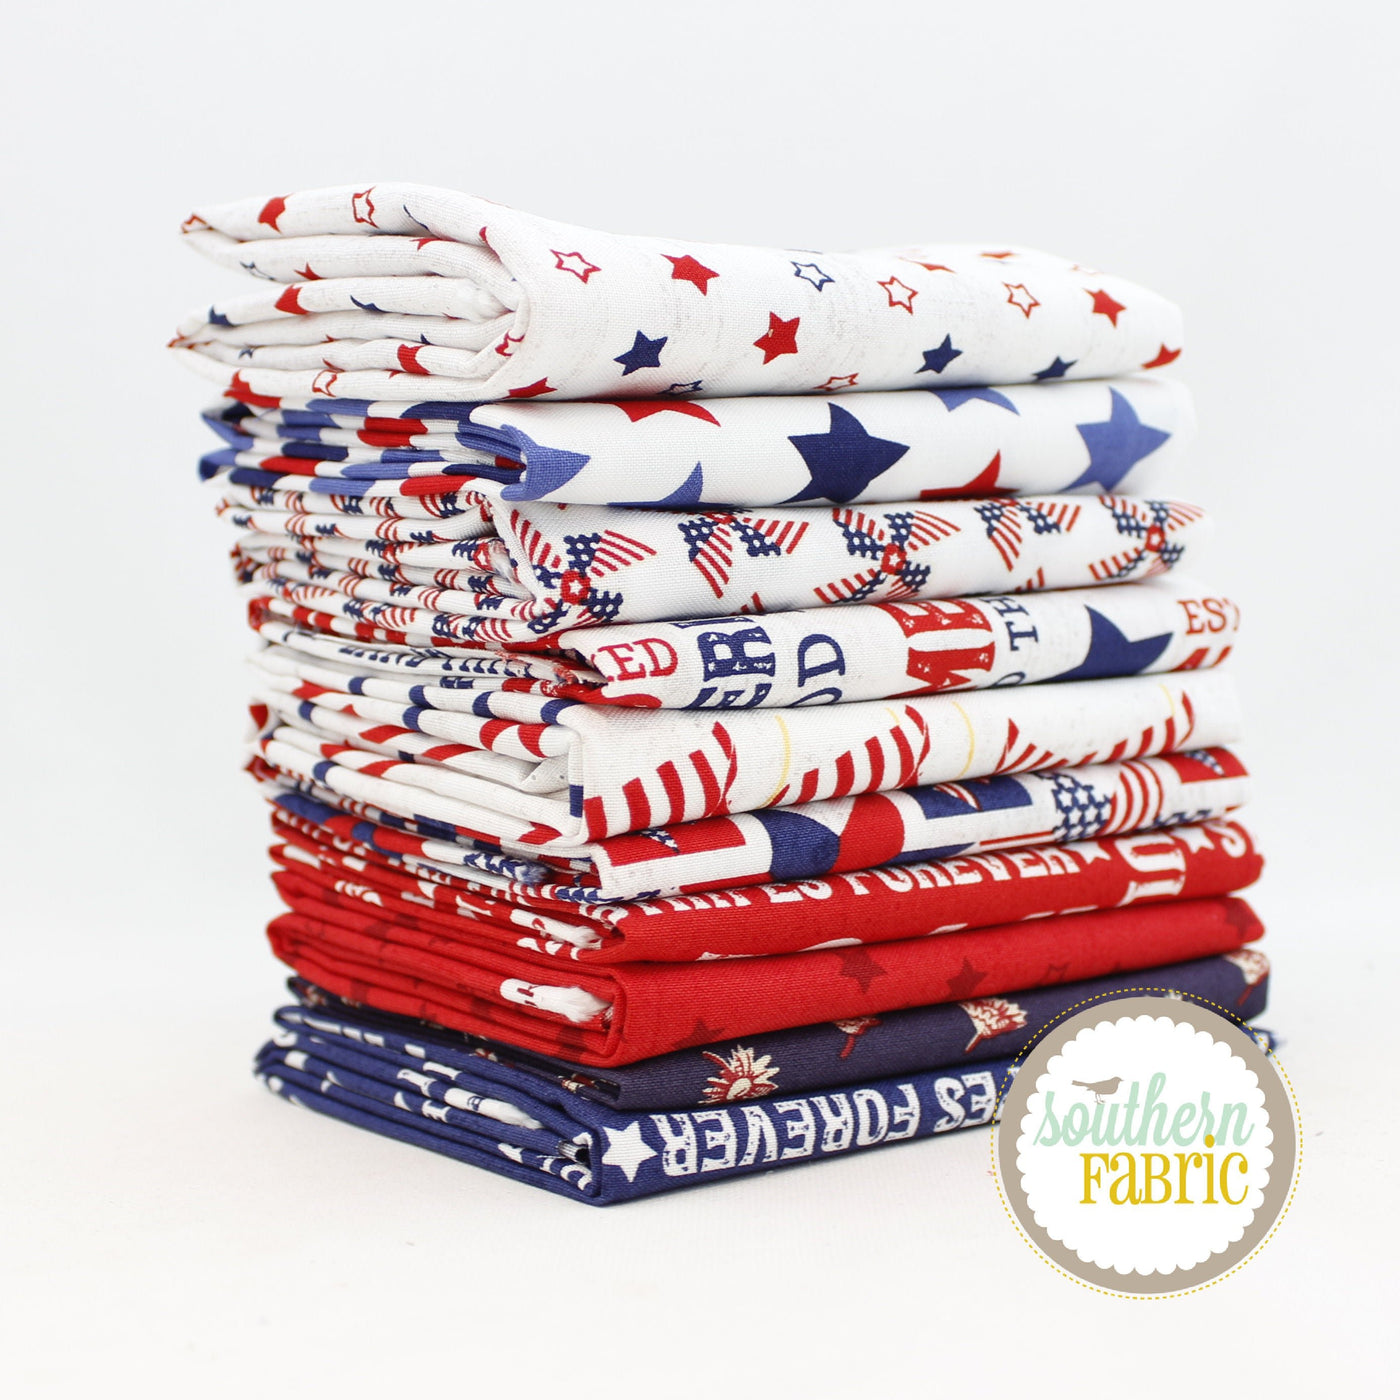 Patriotic Scrap Bag (approx 2 yards) by Mixed Designers for Southern Fabric (PATR.SB)